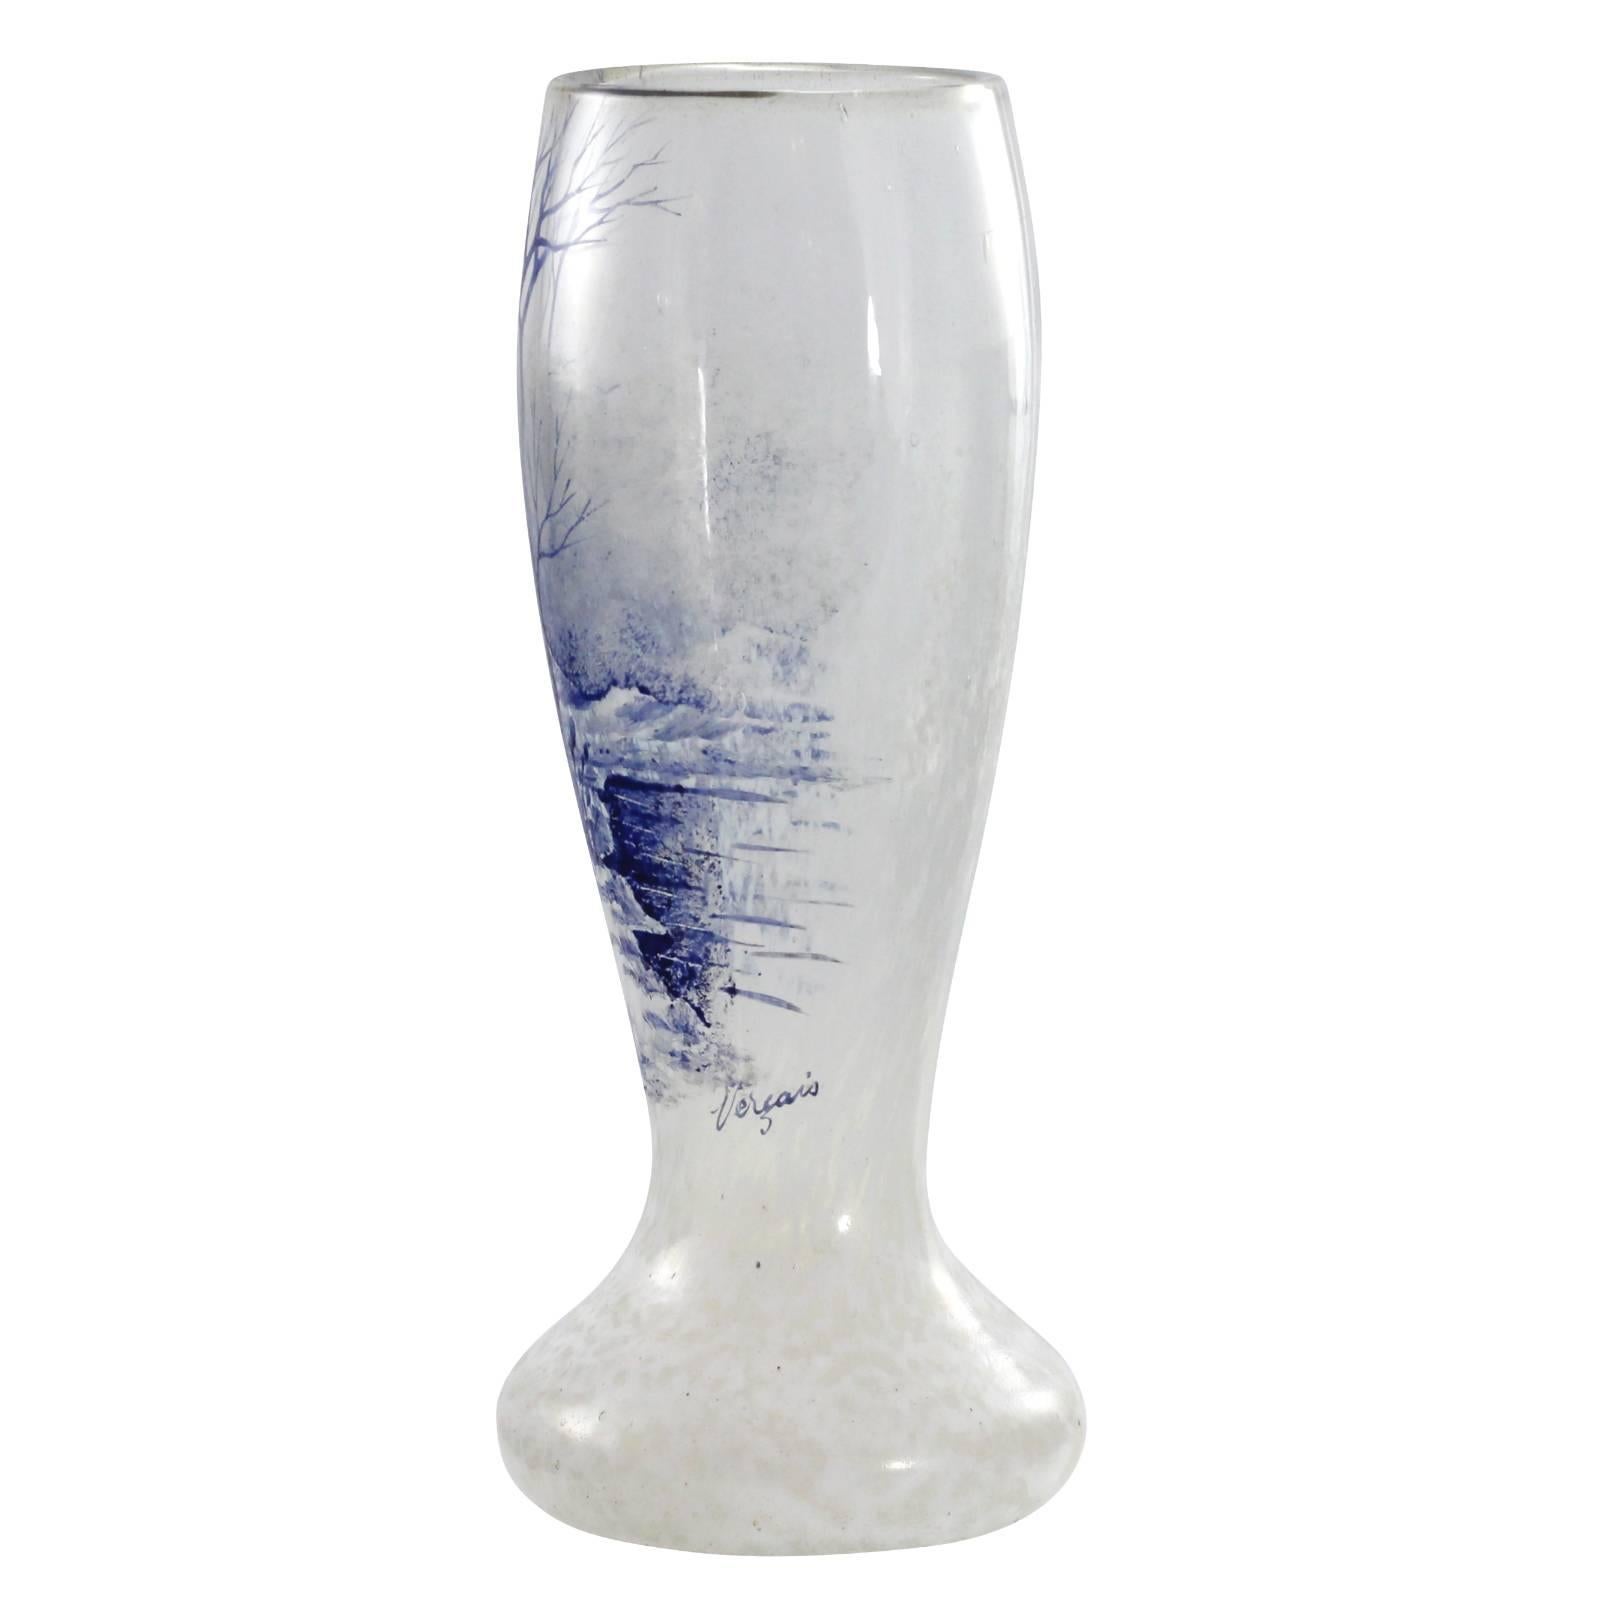 A white glass vase with a blue enamel landscape decoration from the Vercais range by Charles Schneider. The Vercais range was released in the 1930s, shortly after the crash of Wall Street, as a more affordable decorative domestic glass, compared to